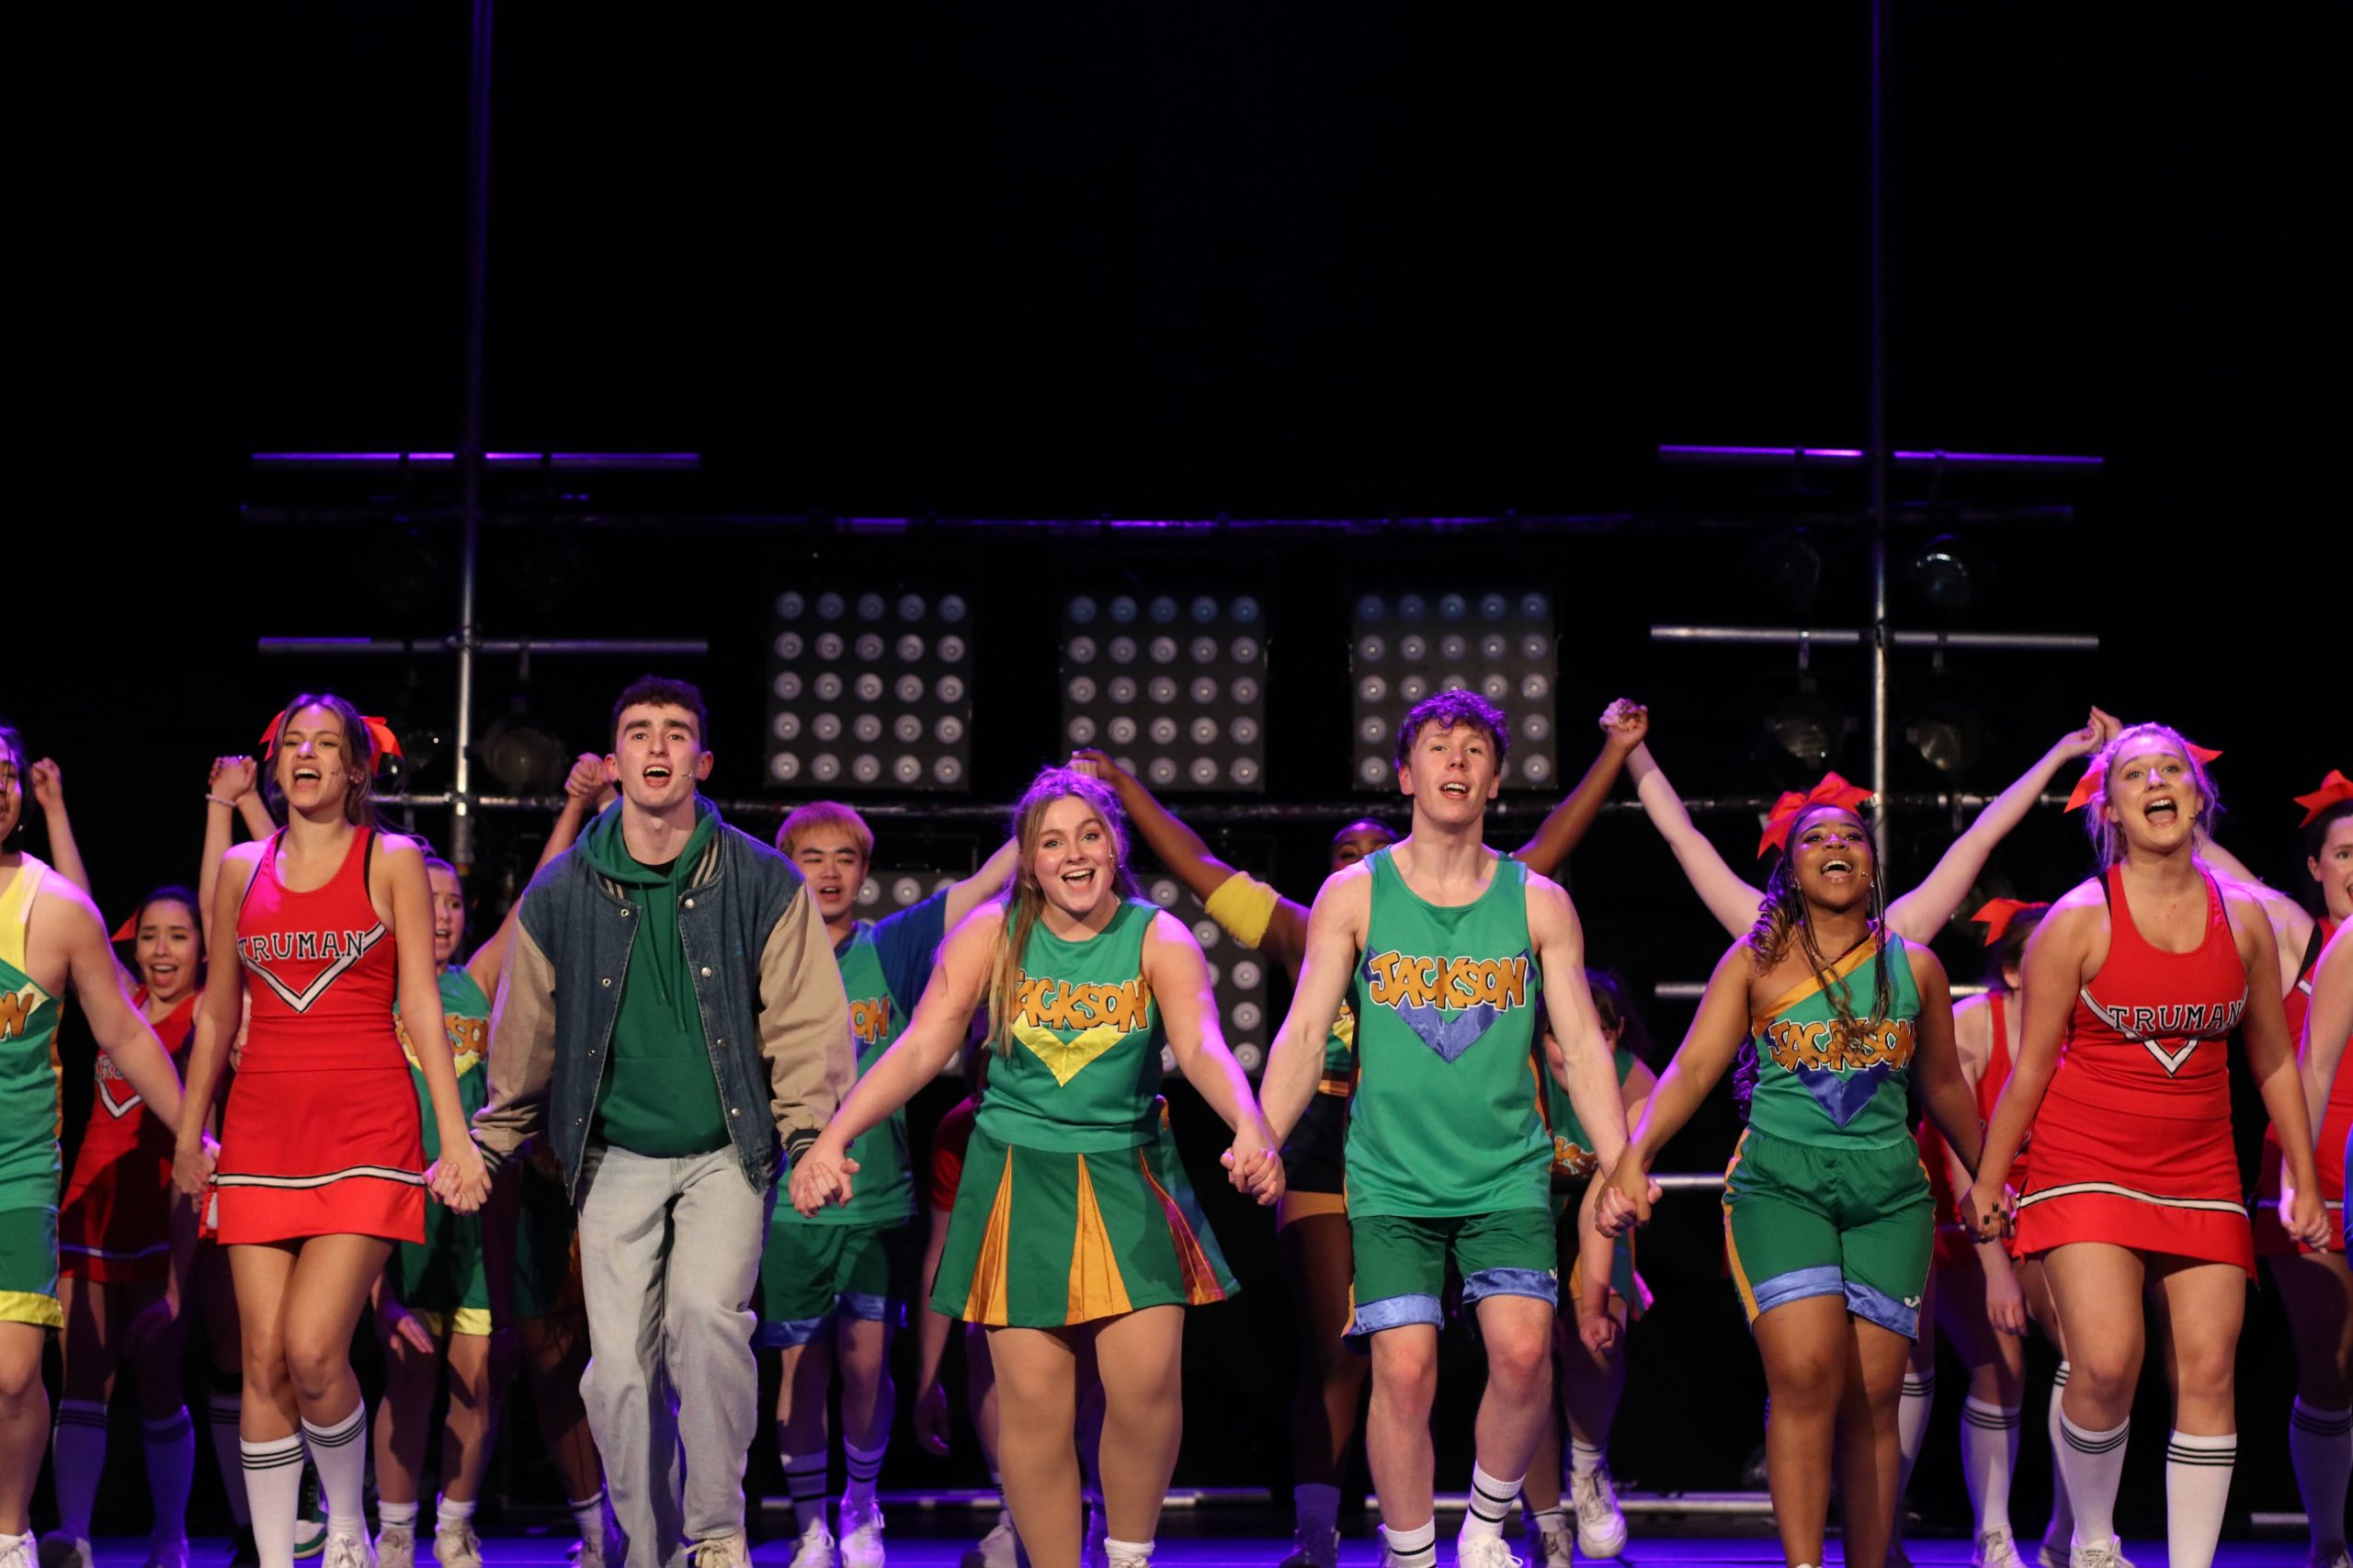 The cast of Bring it On doing a curtain bow on stage